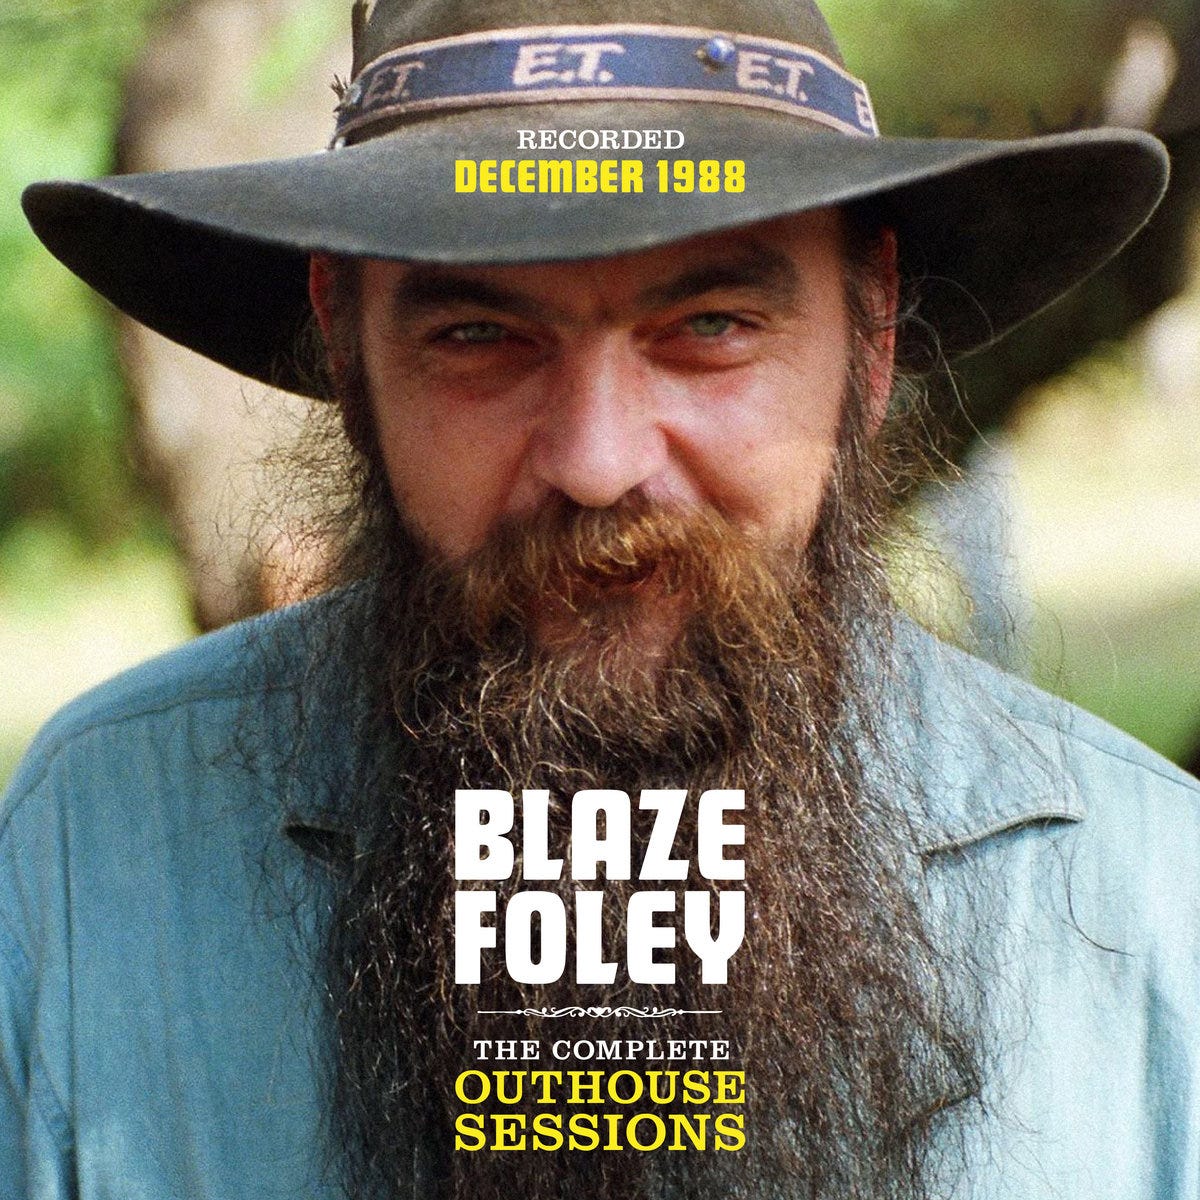 The Complete Outhouse Sessions | Blaze Foley